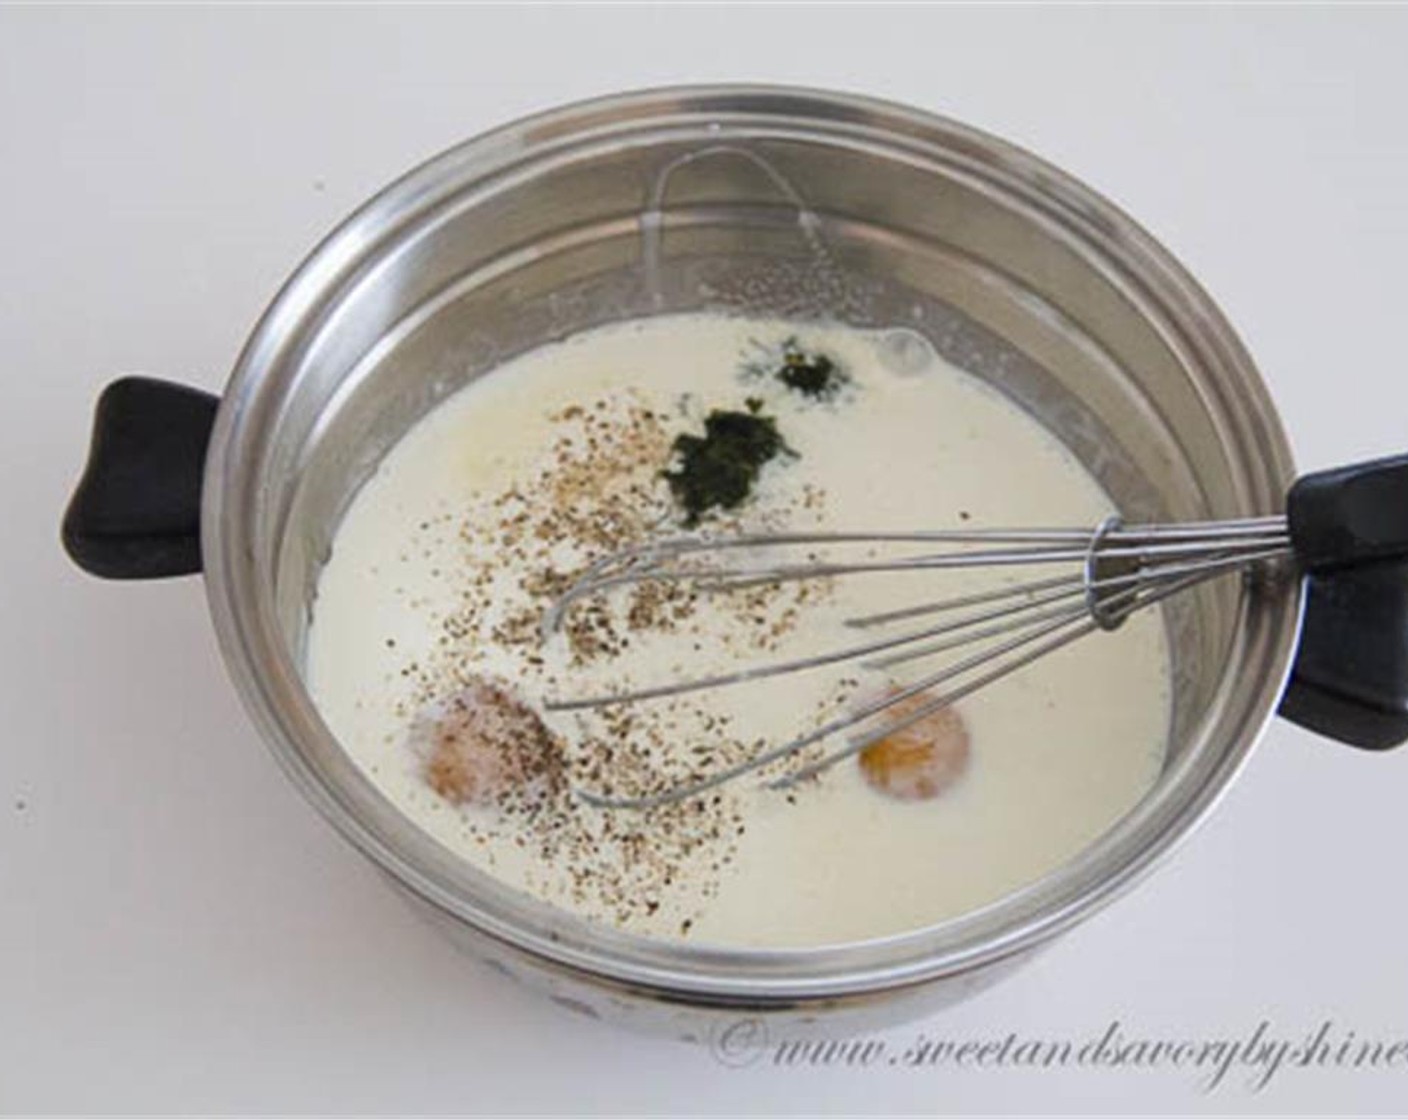 step 5 In a medium bowl, whisk together the Eggs (2), Heavy Cream (2/3 cup), Dried Dill Weed (1 tsp), Salt (1/4 tsp), and Ground Black Pepper (to taste) until smooth.